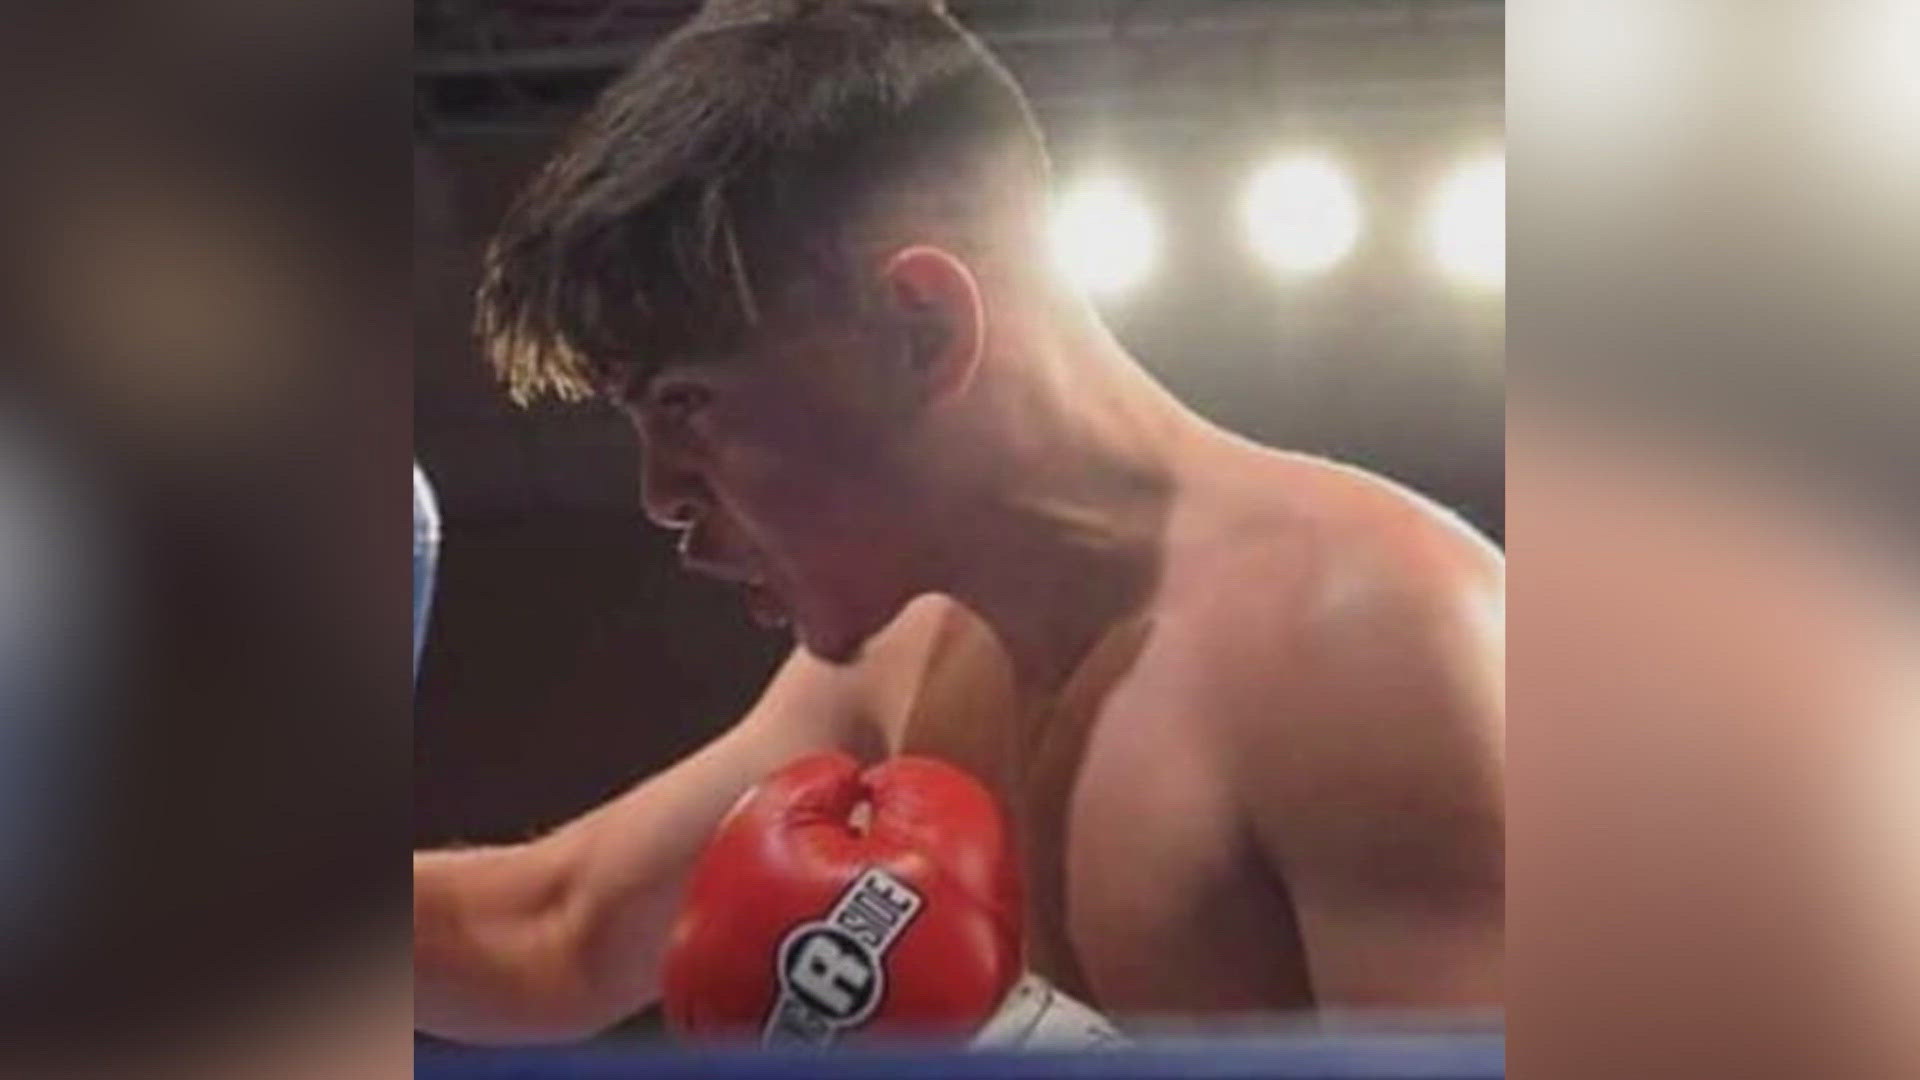 18-year-old San Antonio boxer George Ramos was shot and killed on the northwest side five years ago this month.